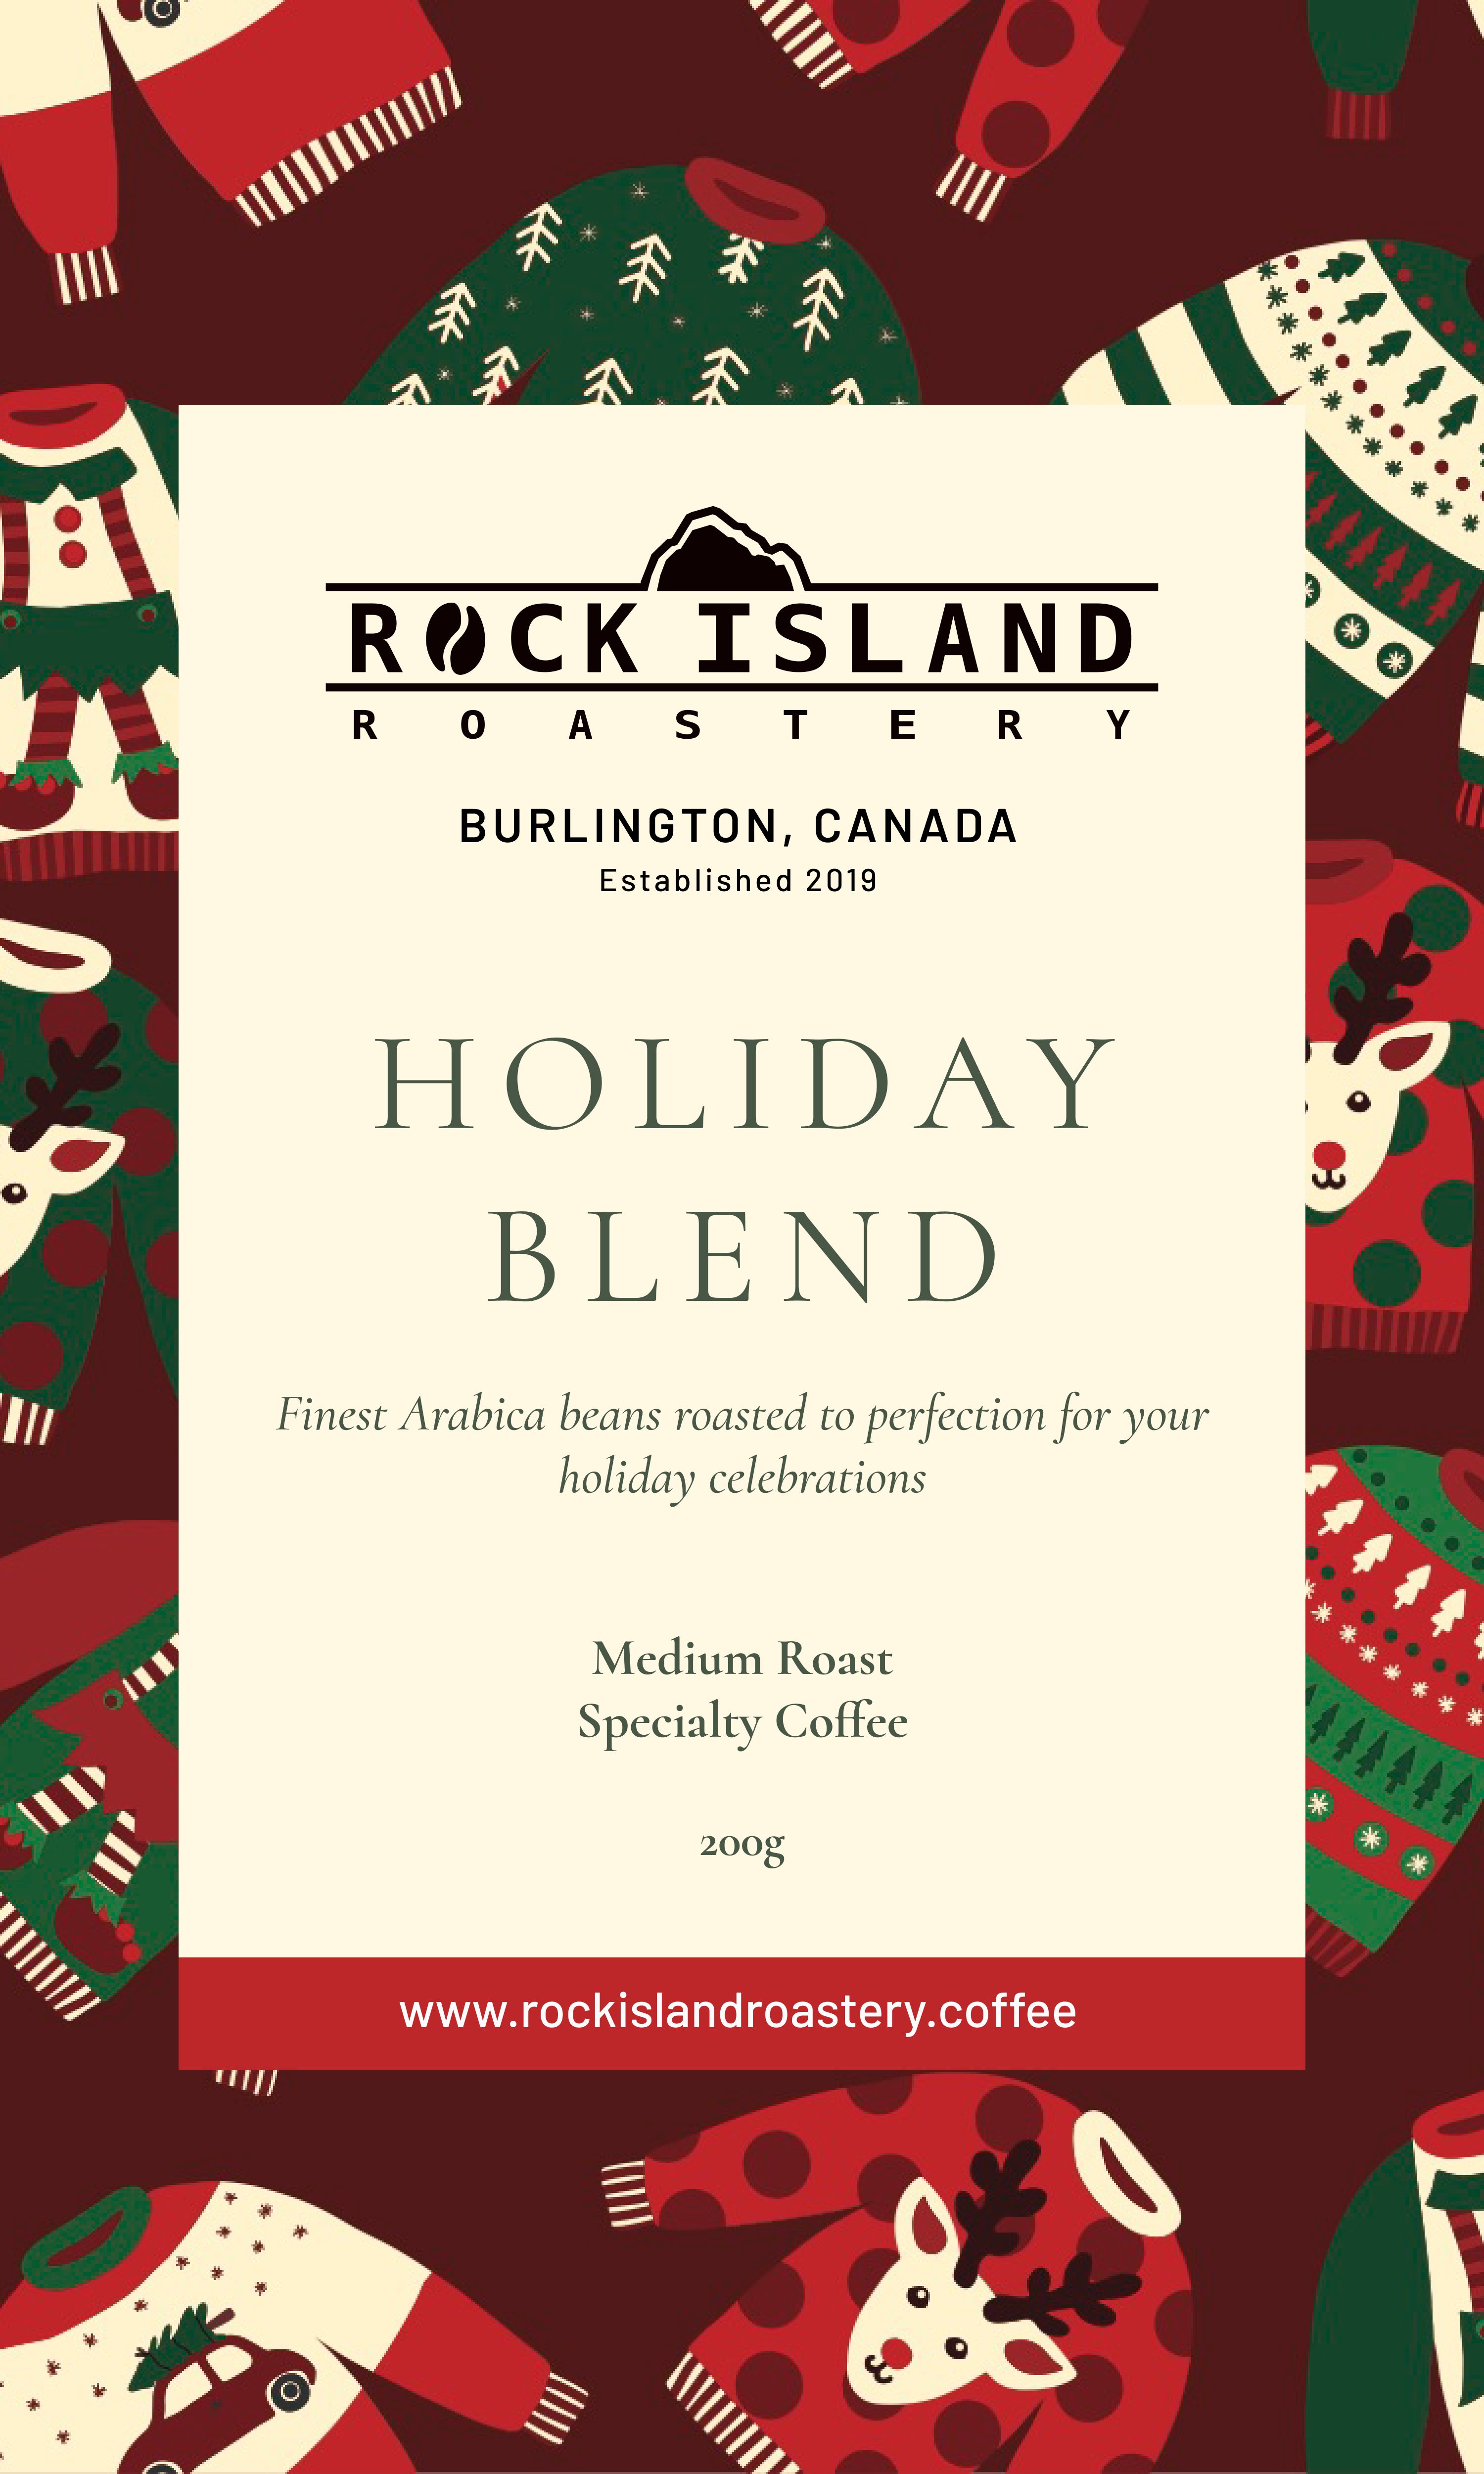 Larry's Coffee - Rockin' Holiday Blend